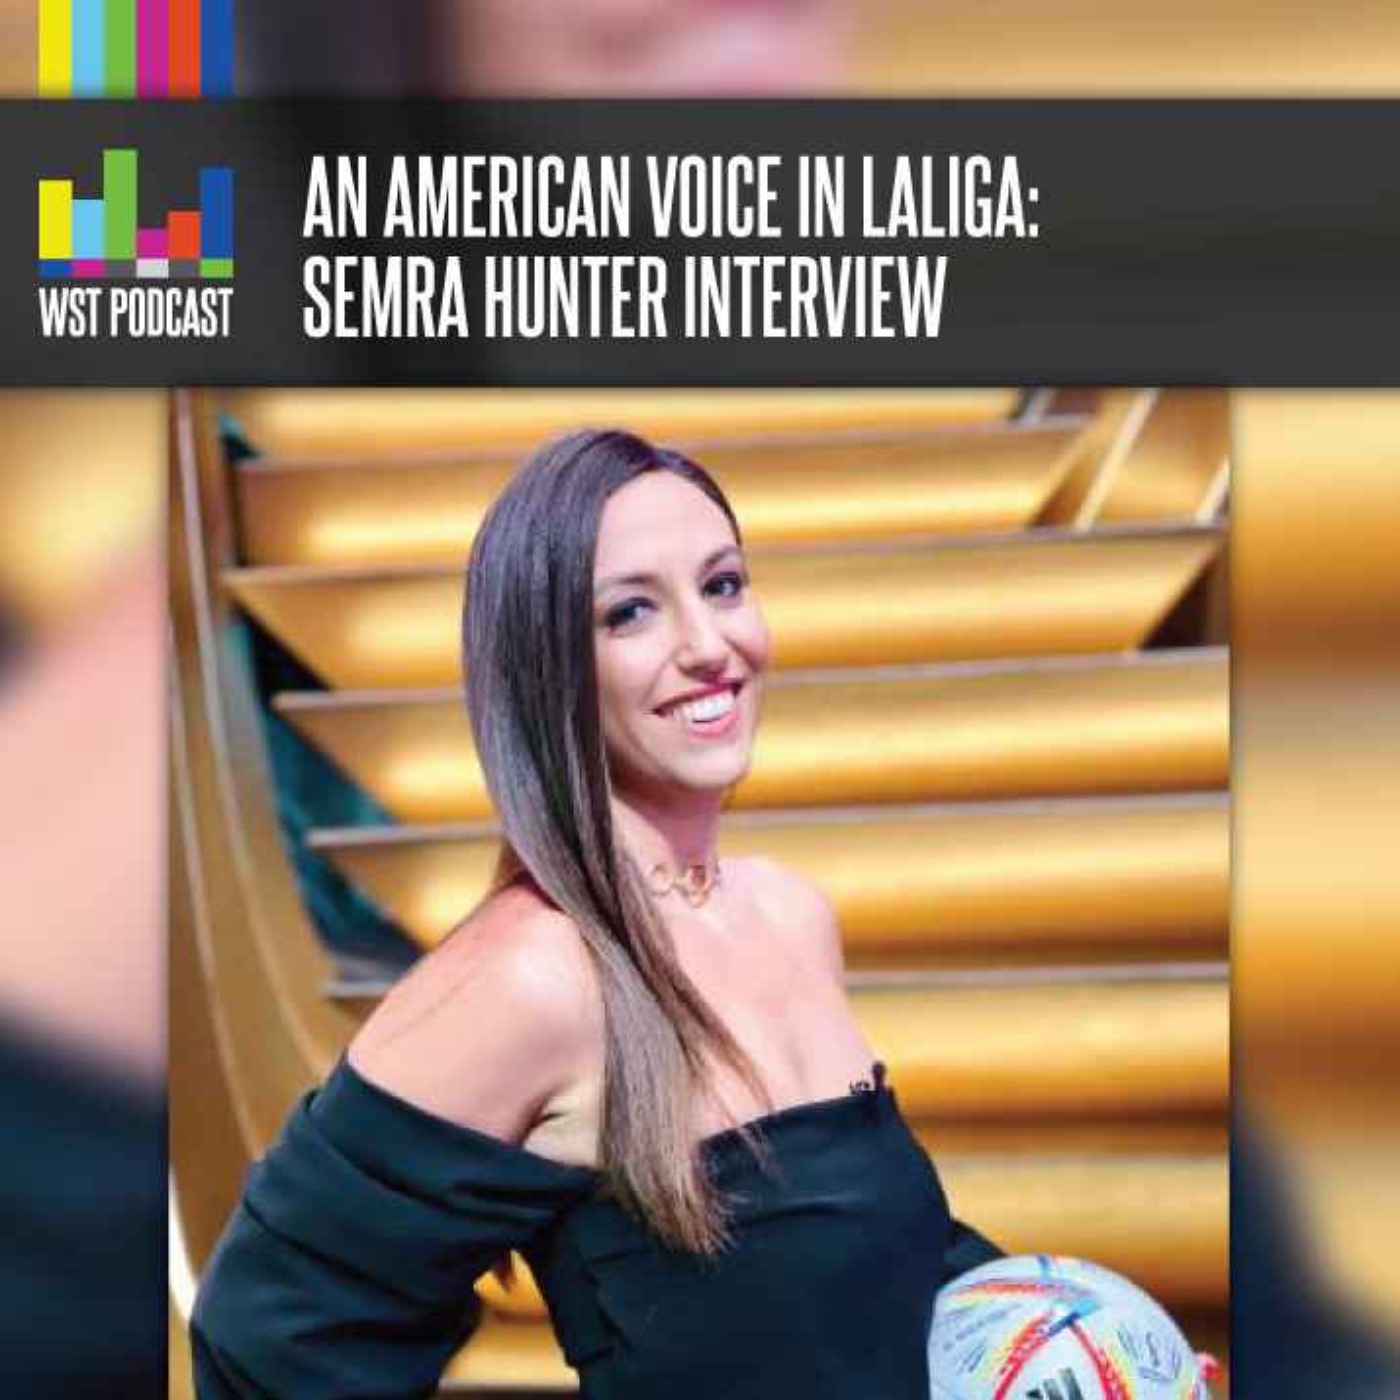 Semra Hunter interview: An American voice in LaLiga